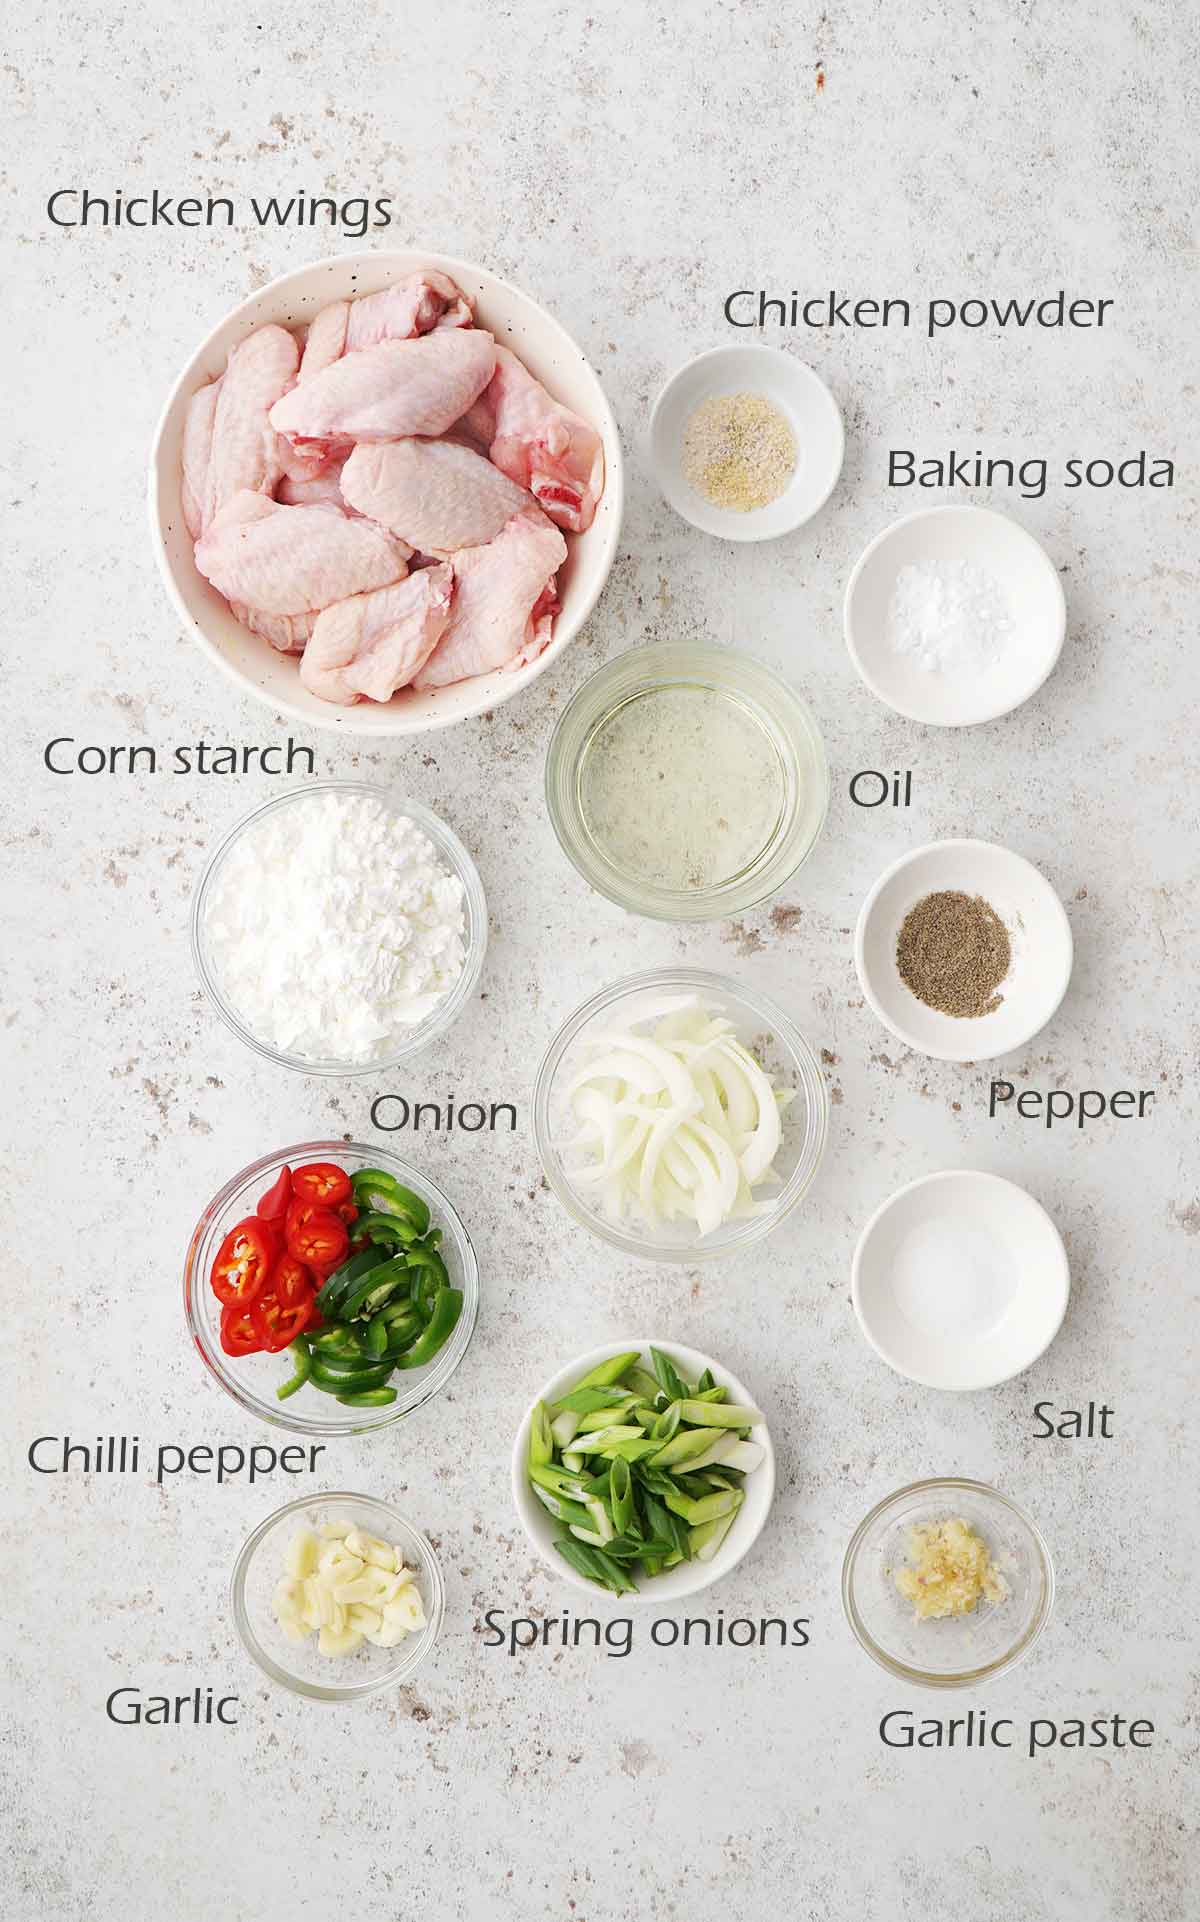 Labelled ingredients of making salt and pepper wings displayed on the white table.